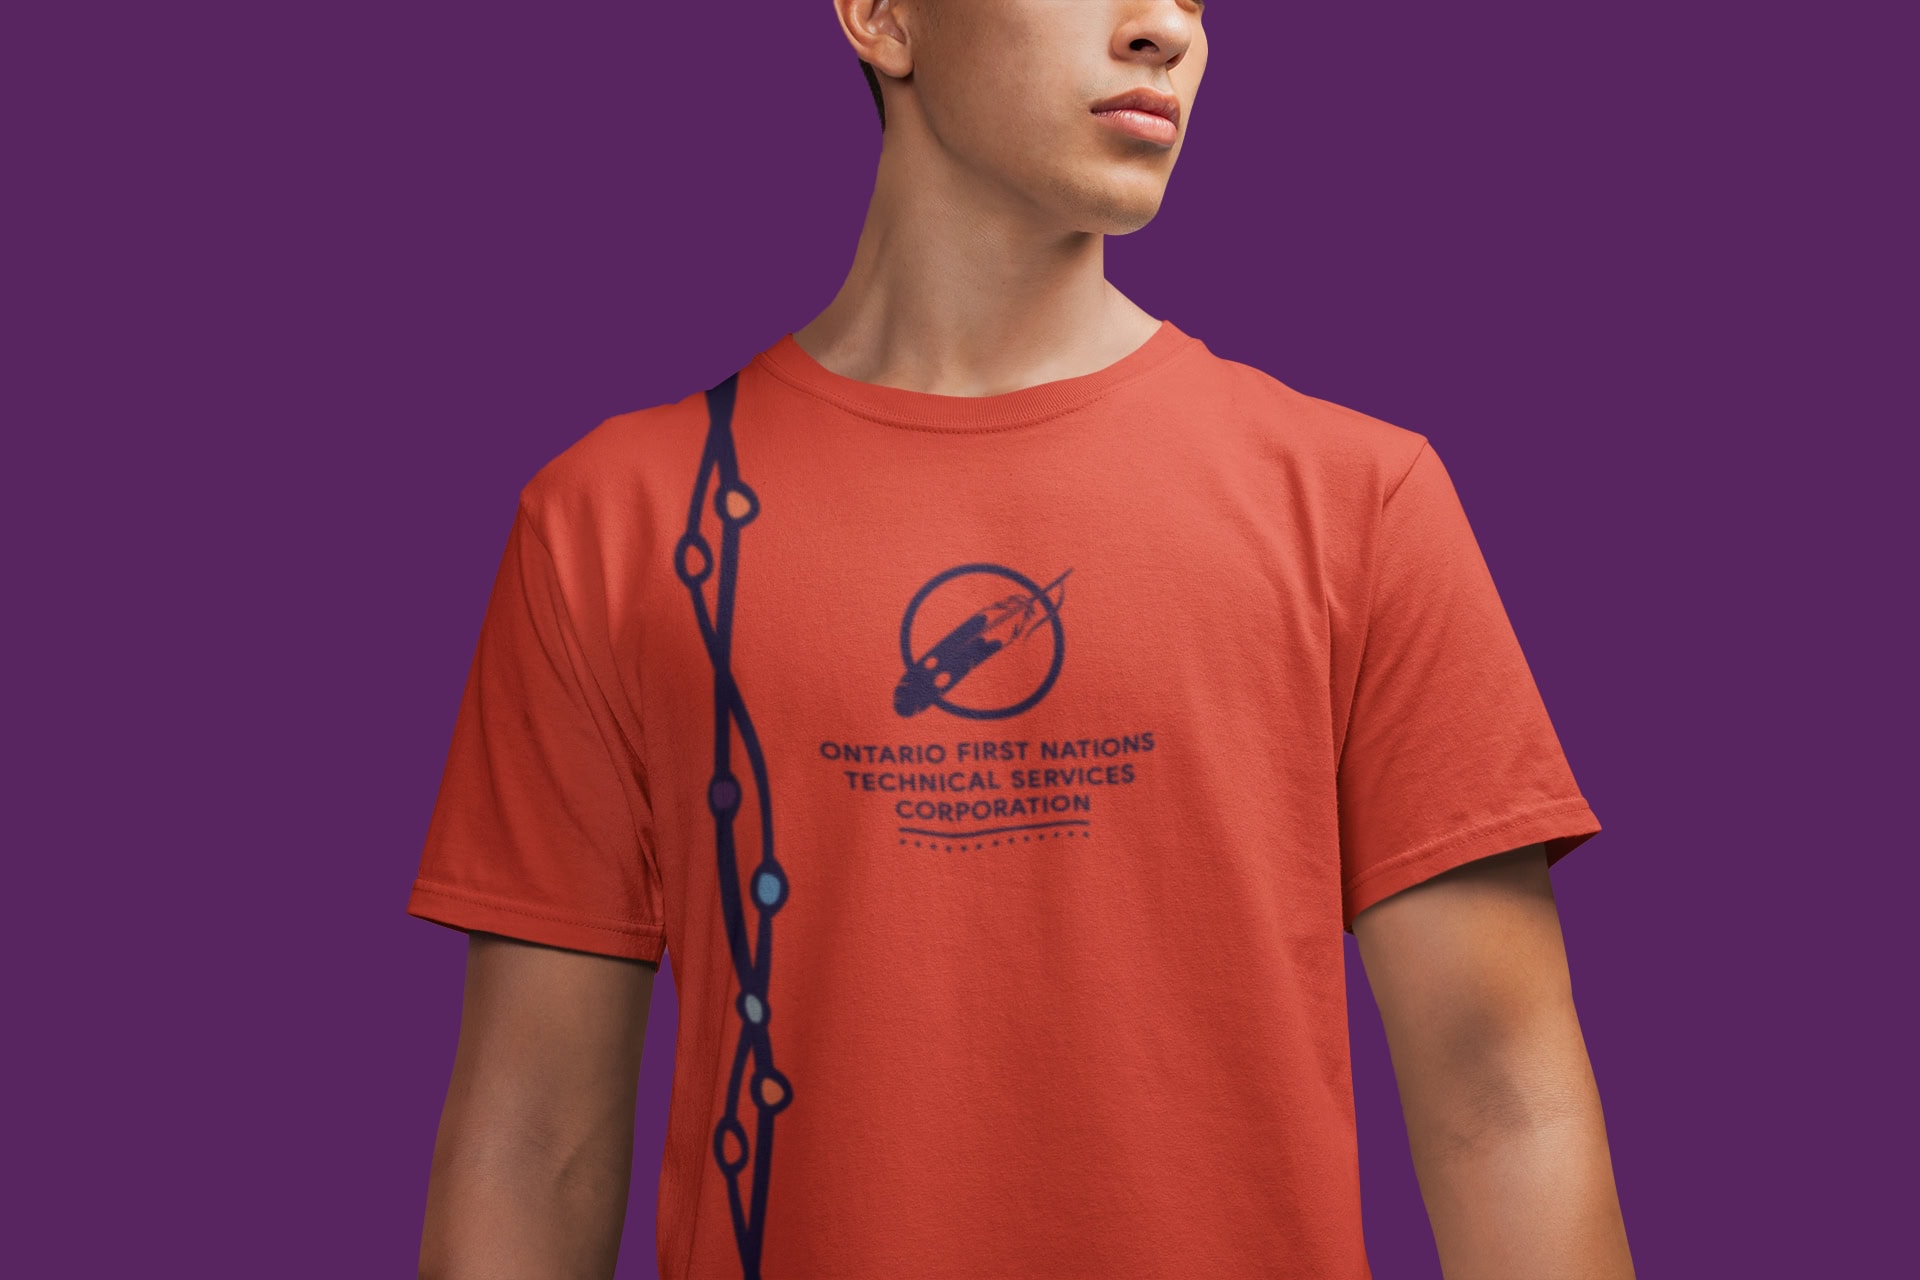 A person stands in front of a purple background with a bright orange shirt. On the shirt is the OFNTSC logo.